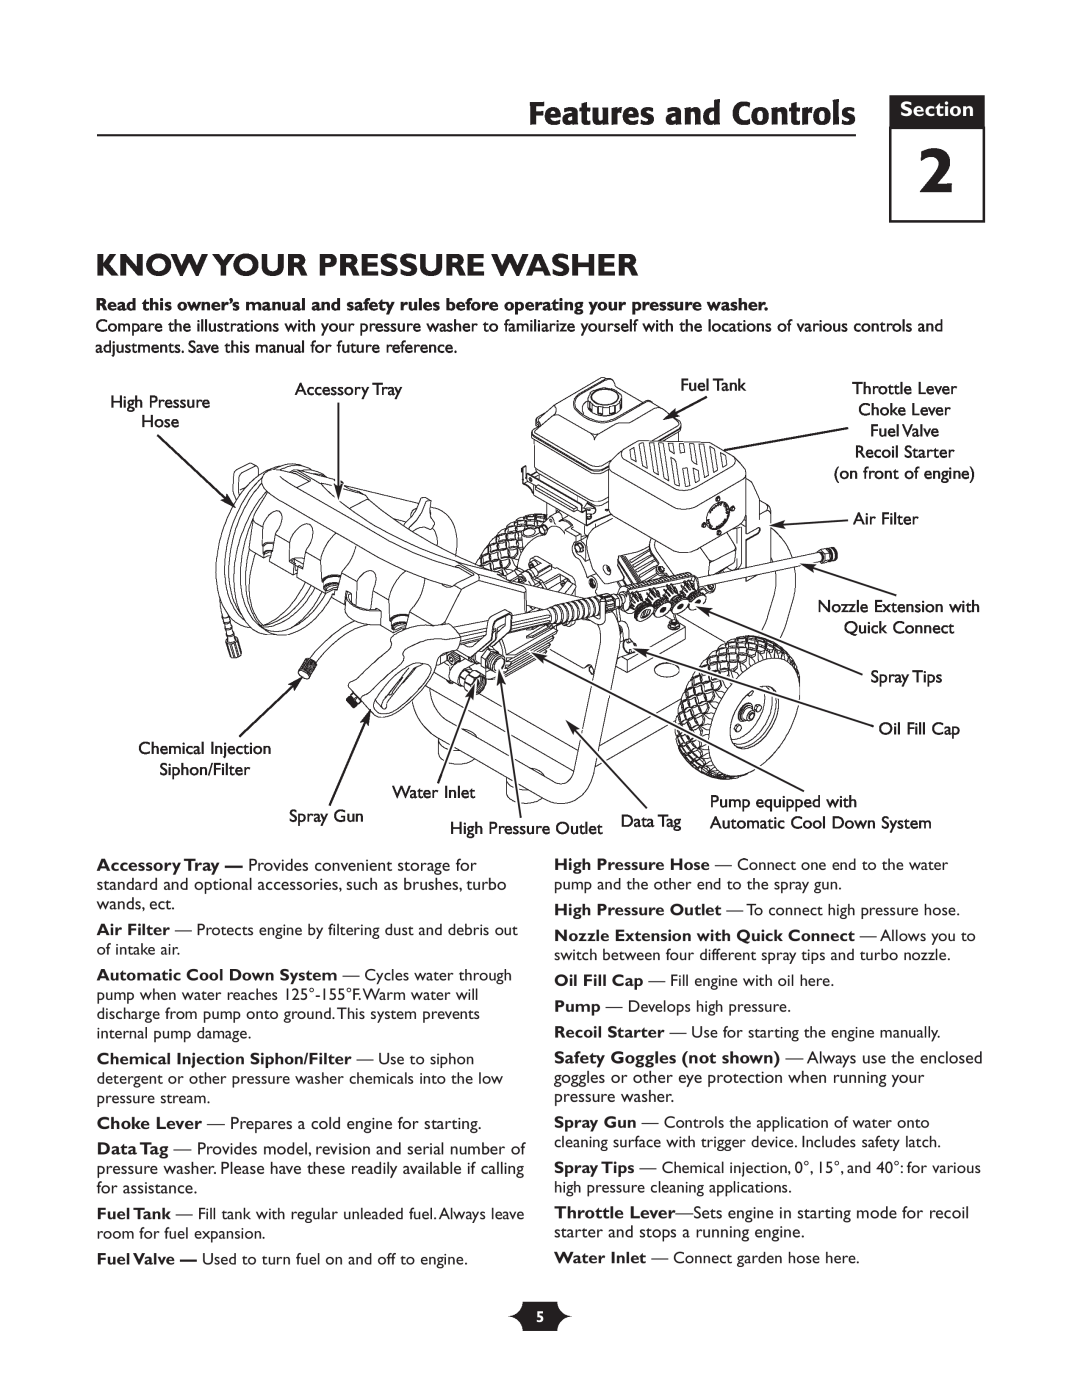 Briggs & Stratton 20209 owner manual Features and Controls Section, Know Your Pressure Washer 